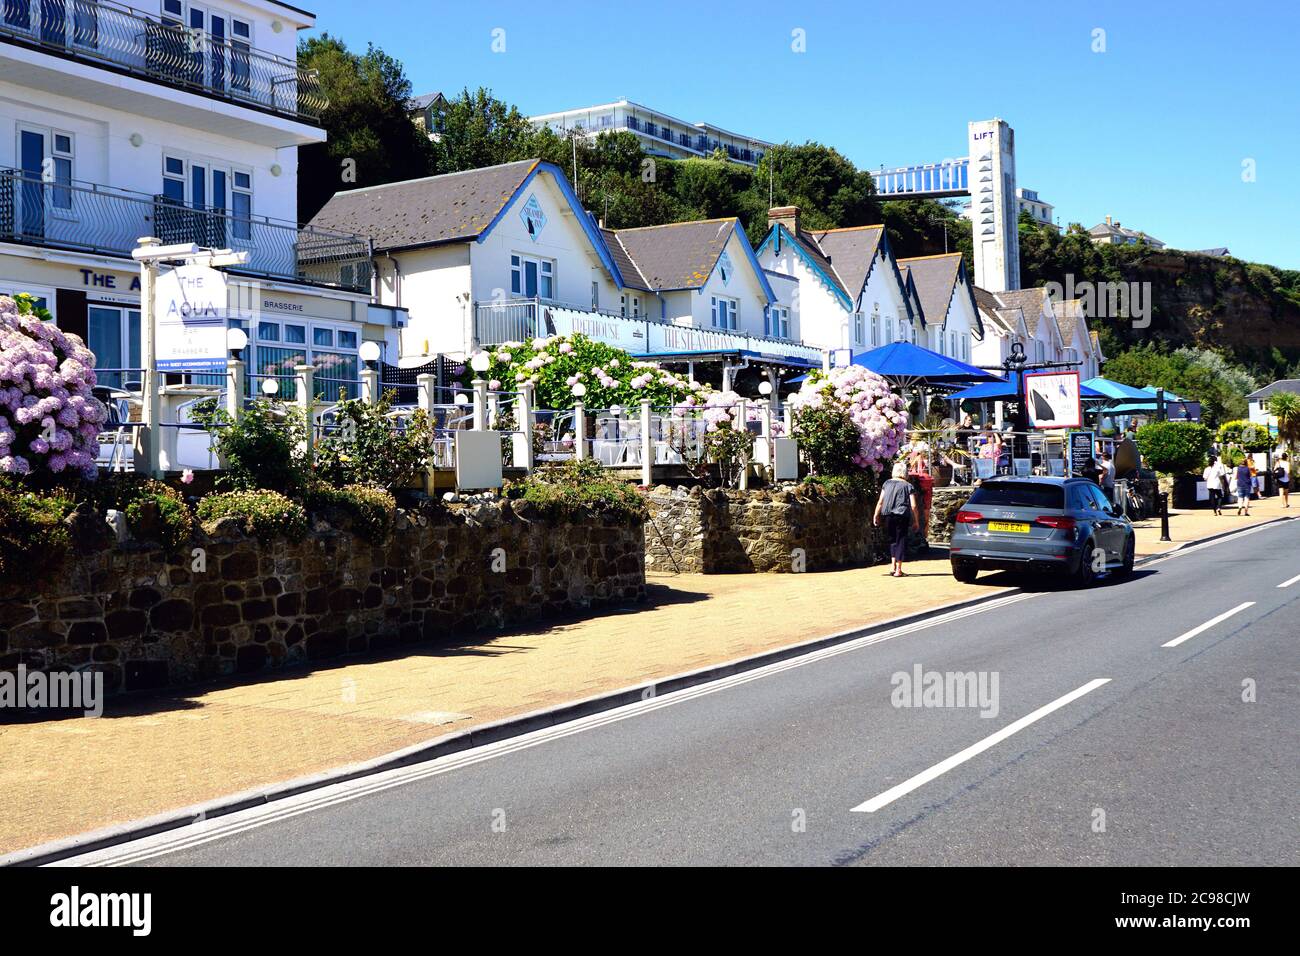 Shanklin, Isle of Wight, UK. July 18, 2020. Holidaymakers walking past seafront hotels and diners towards the cliff lift at Shanklin on the Isle of Wi Stock Photo